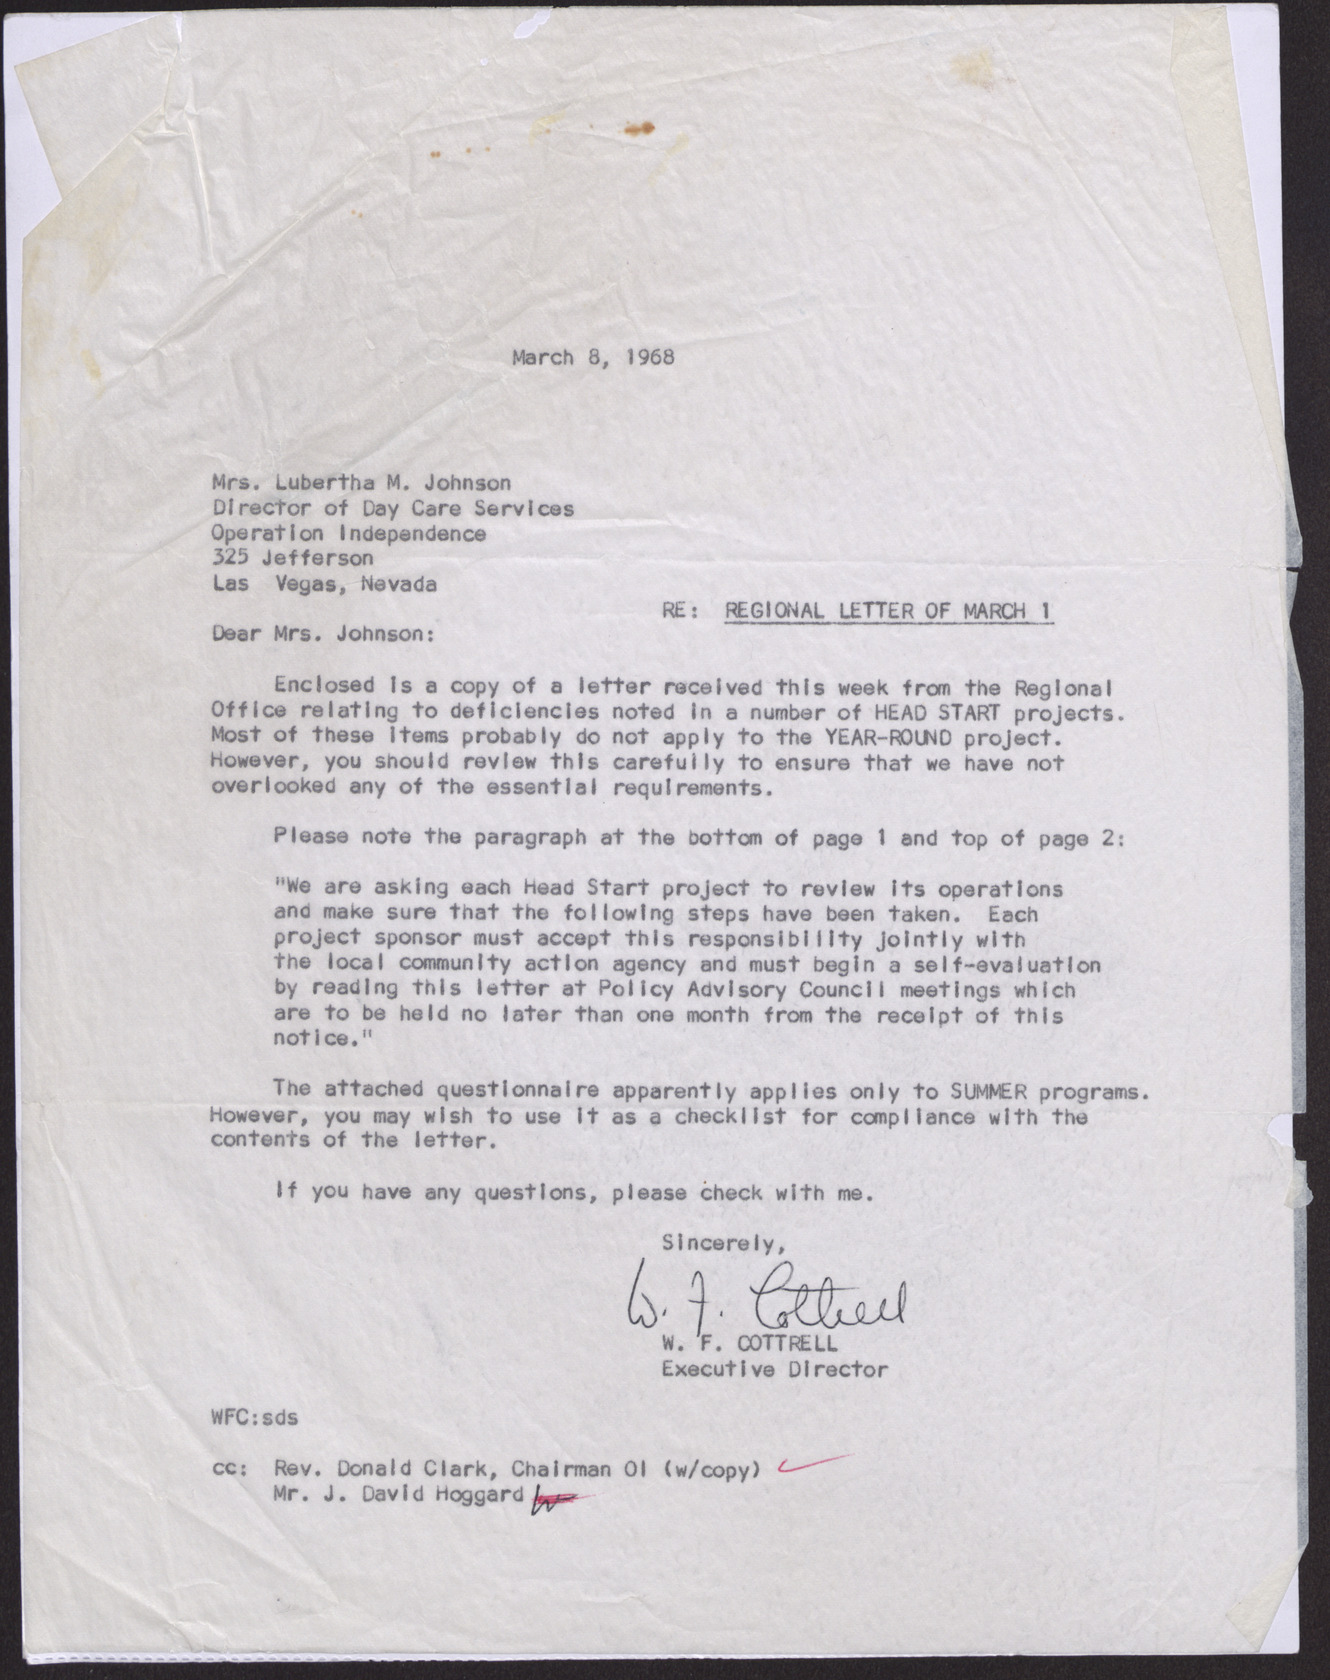 Letter to Mrs. Lubertha M. Johnson from W. F. Cottrell, March 8, 1968